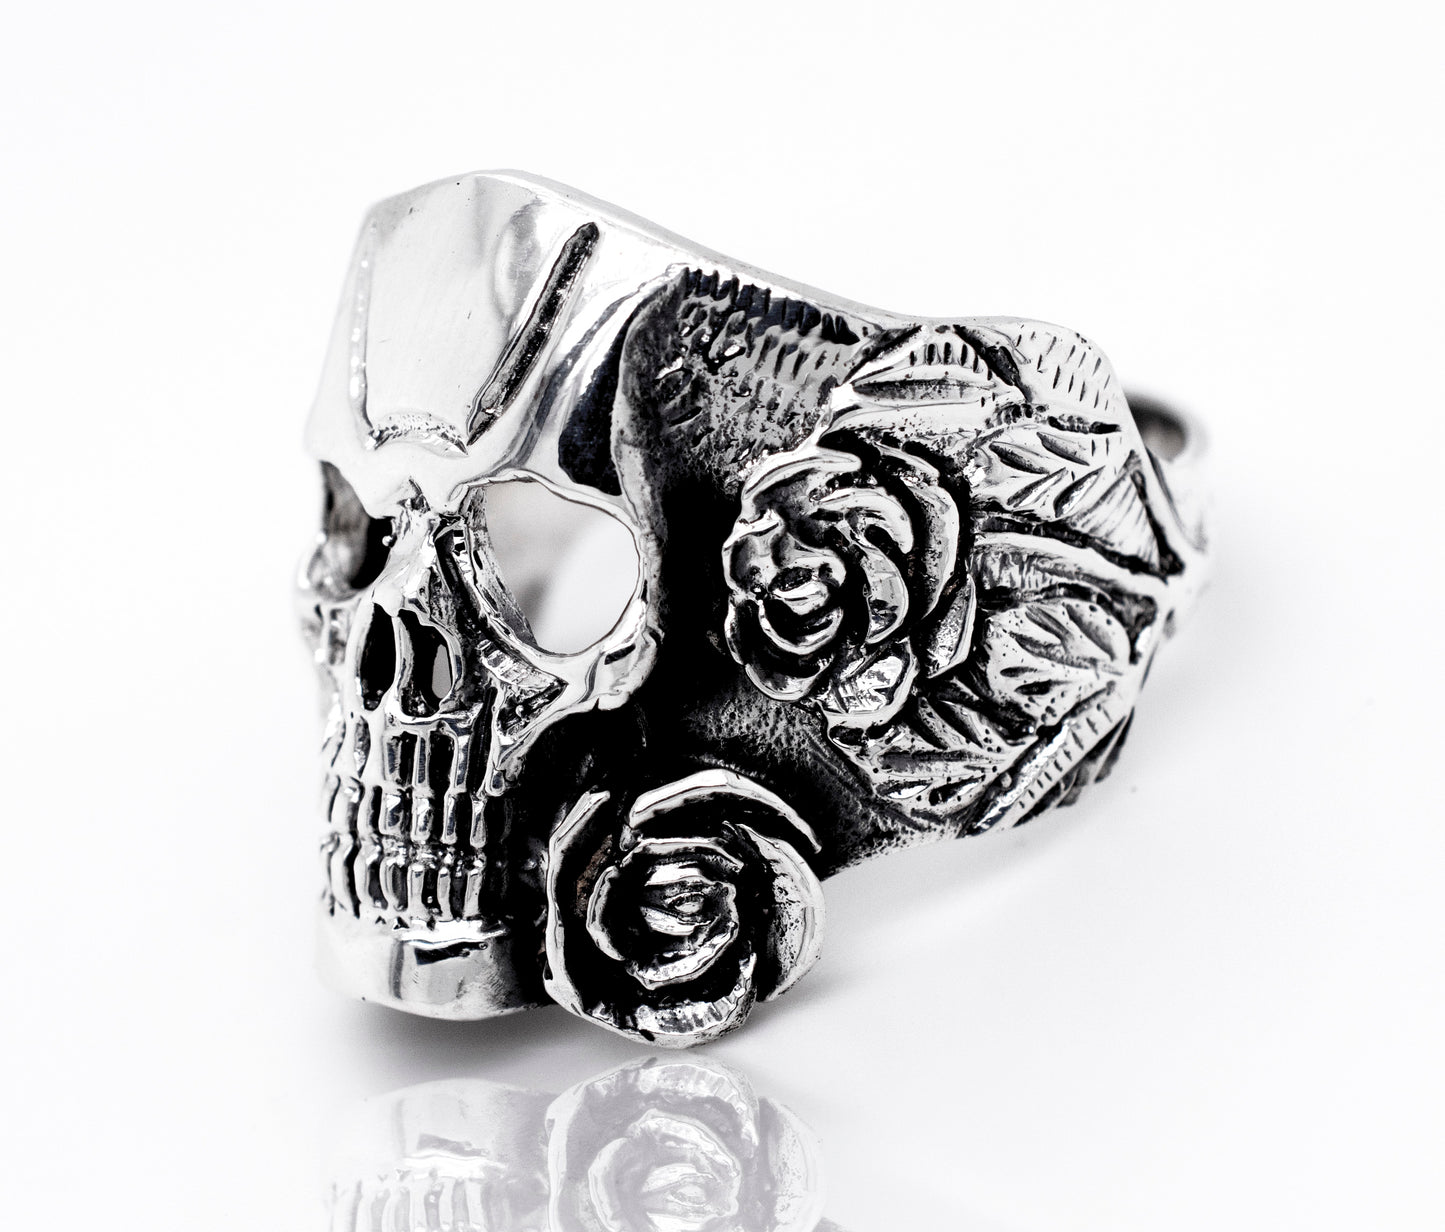 
                  
                    A Skull Ring With Rose Design made of sterling silver adorned with intricate roses.
                  
                